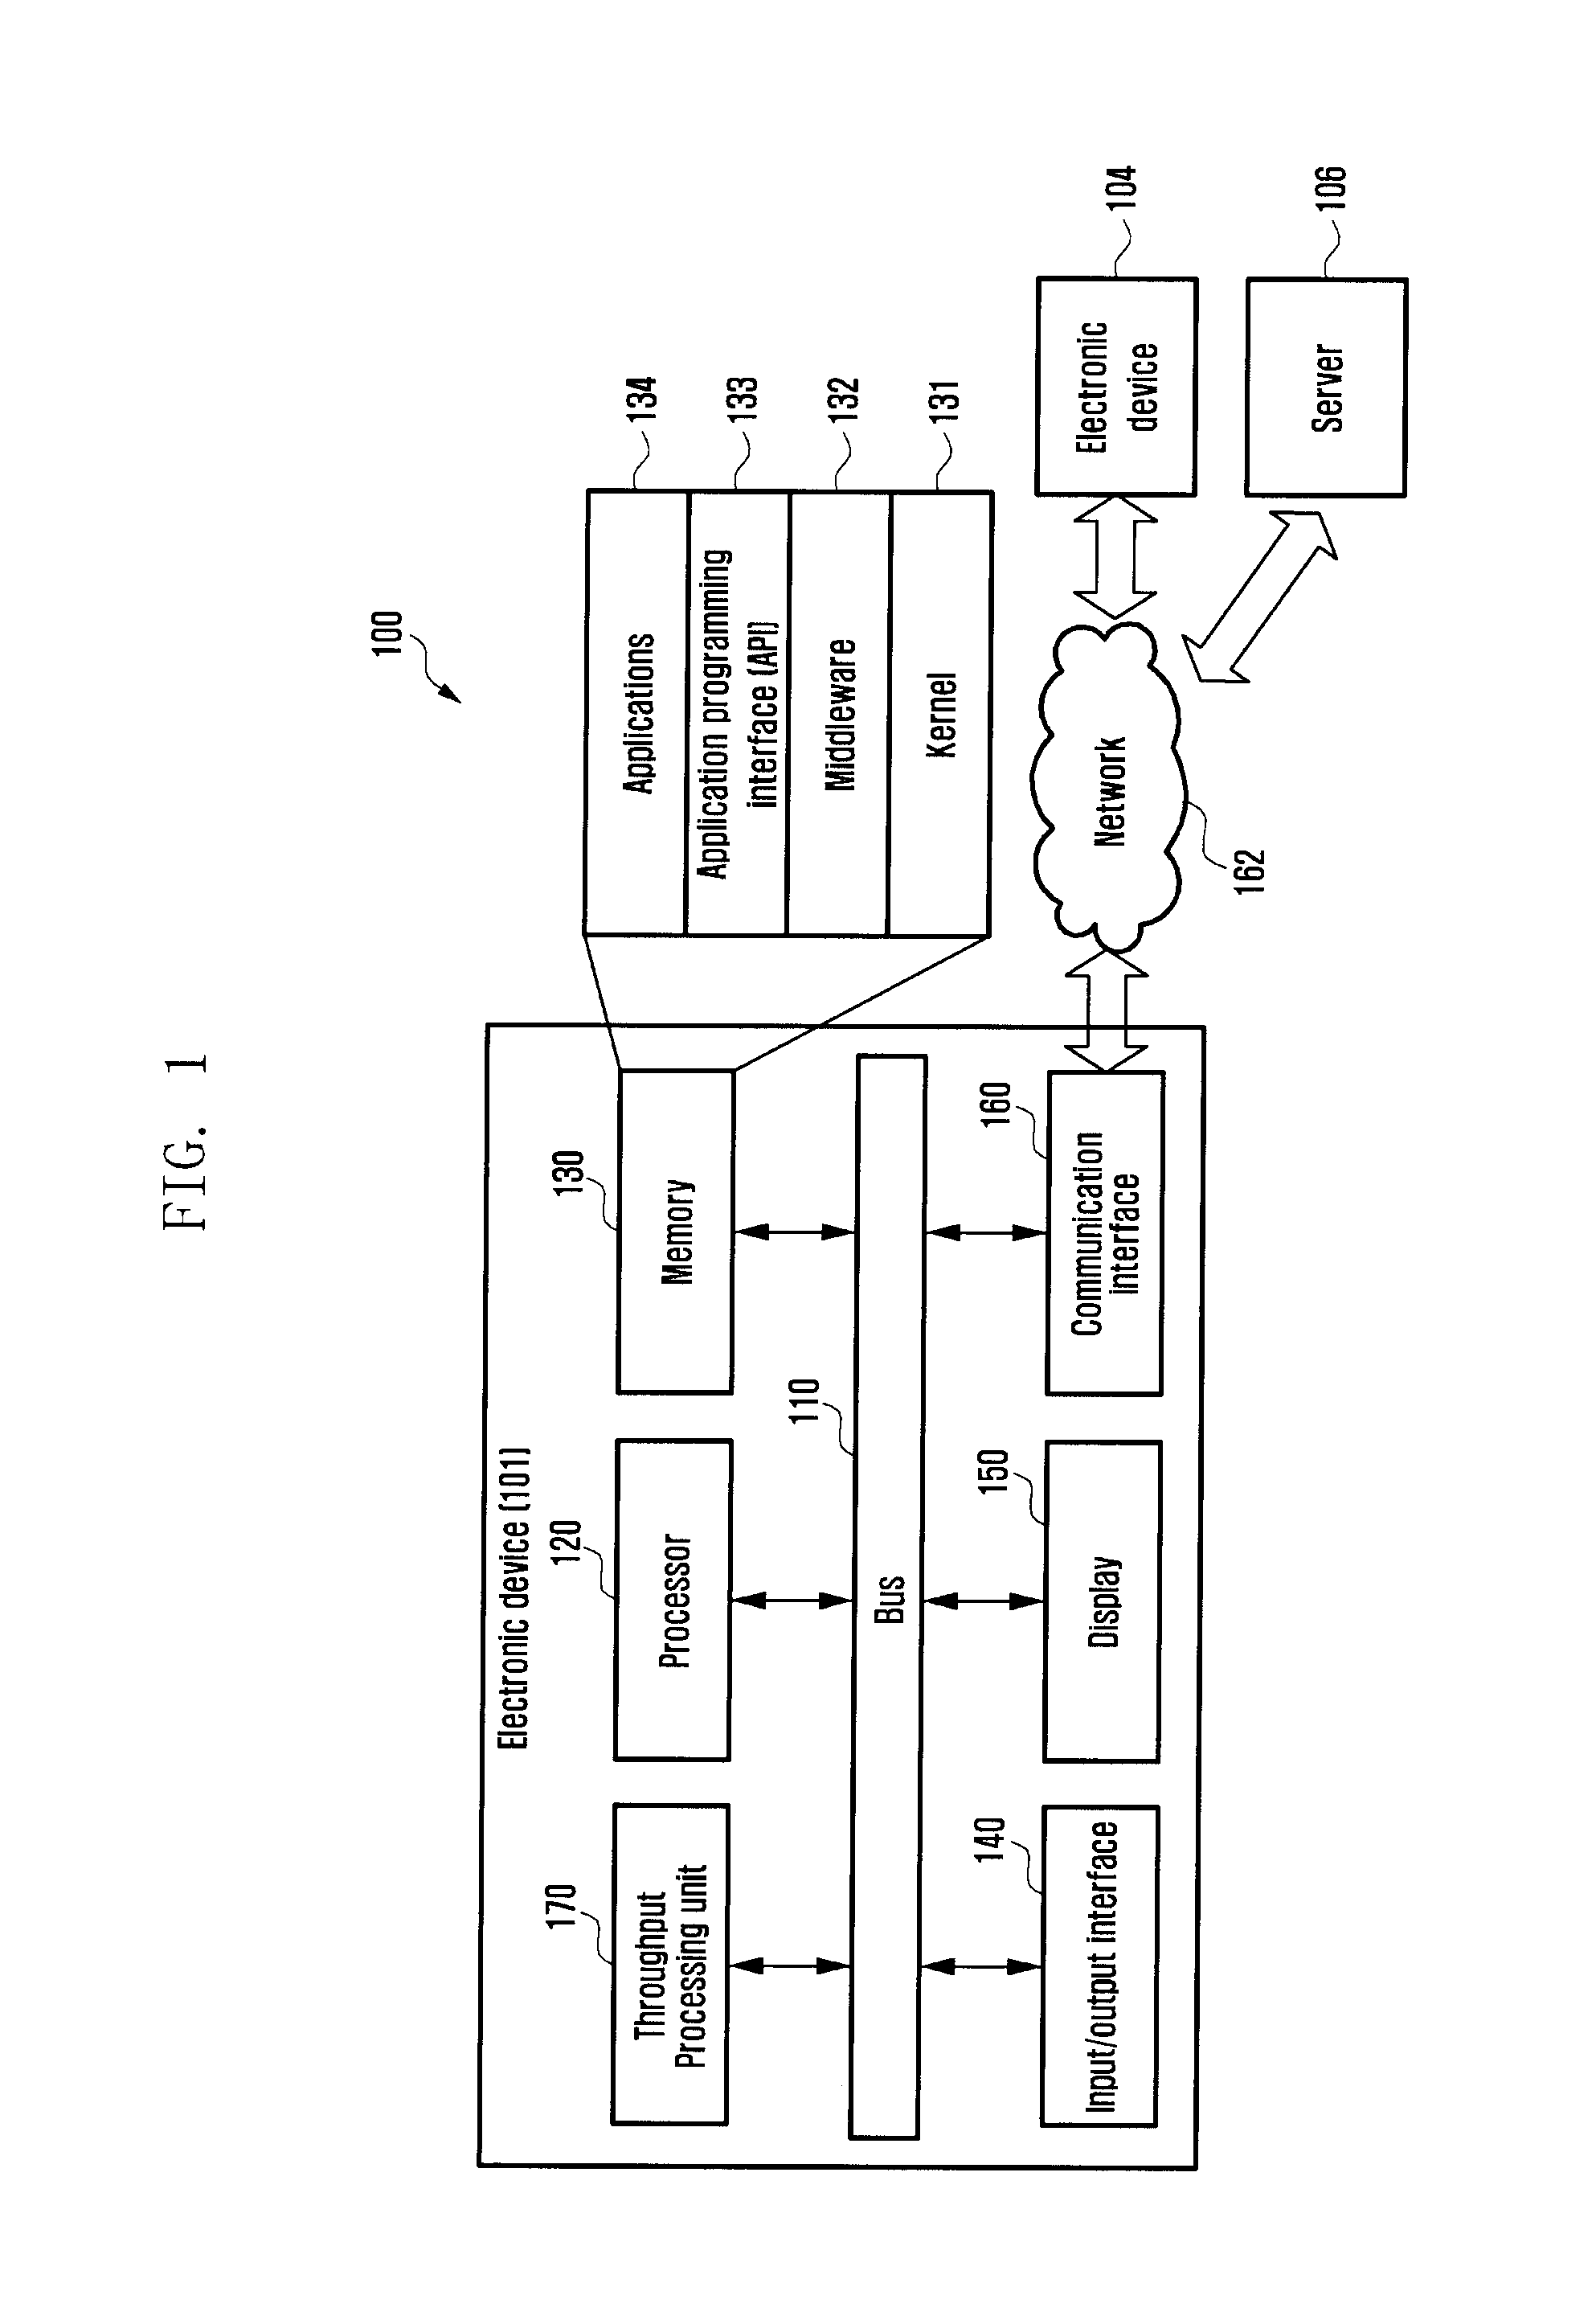 Method and apparatus for adaptive device re-configuration